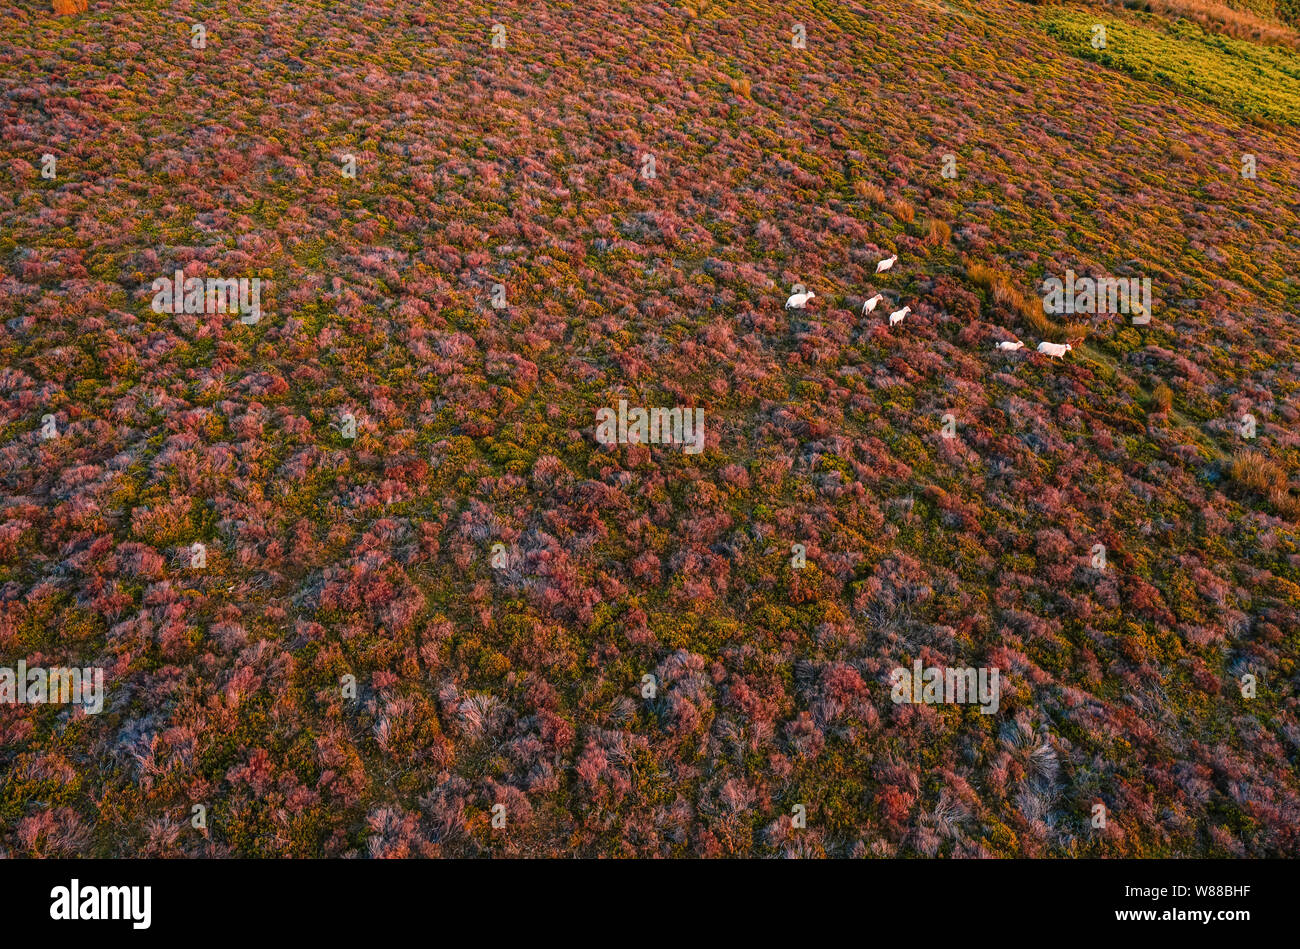 Pack of sheep on heathland, aerial view over Shropshire Hills in United Kingdom Stock Photo